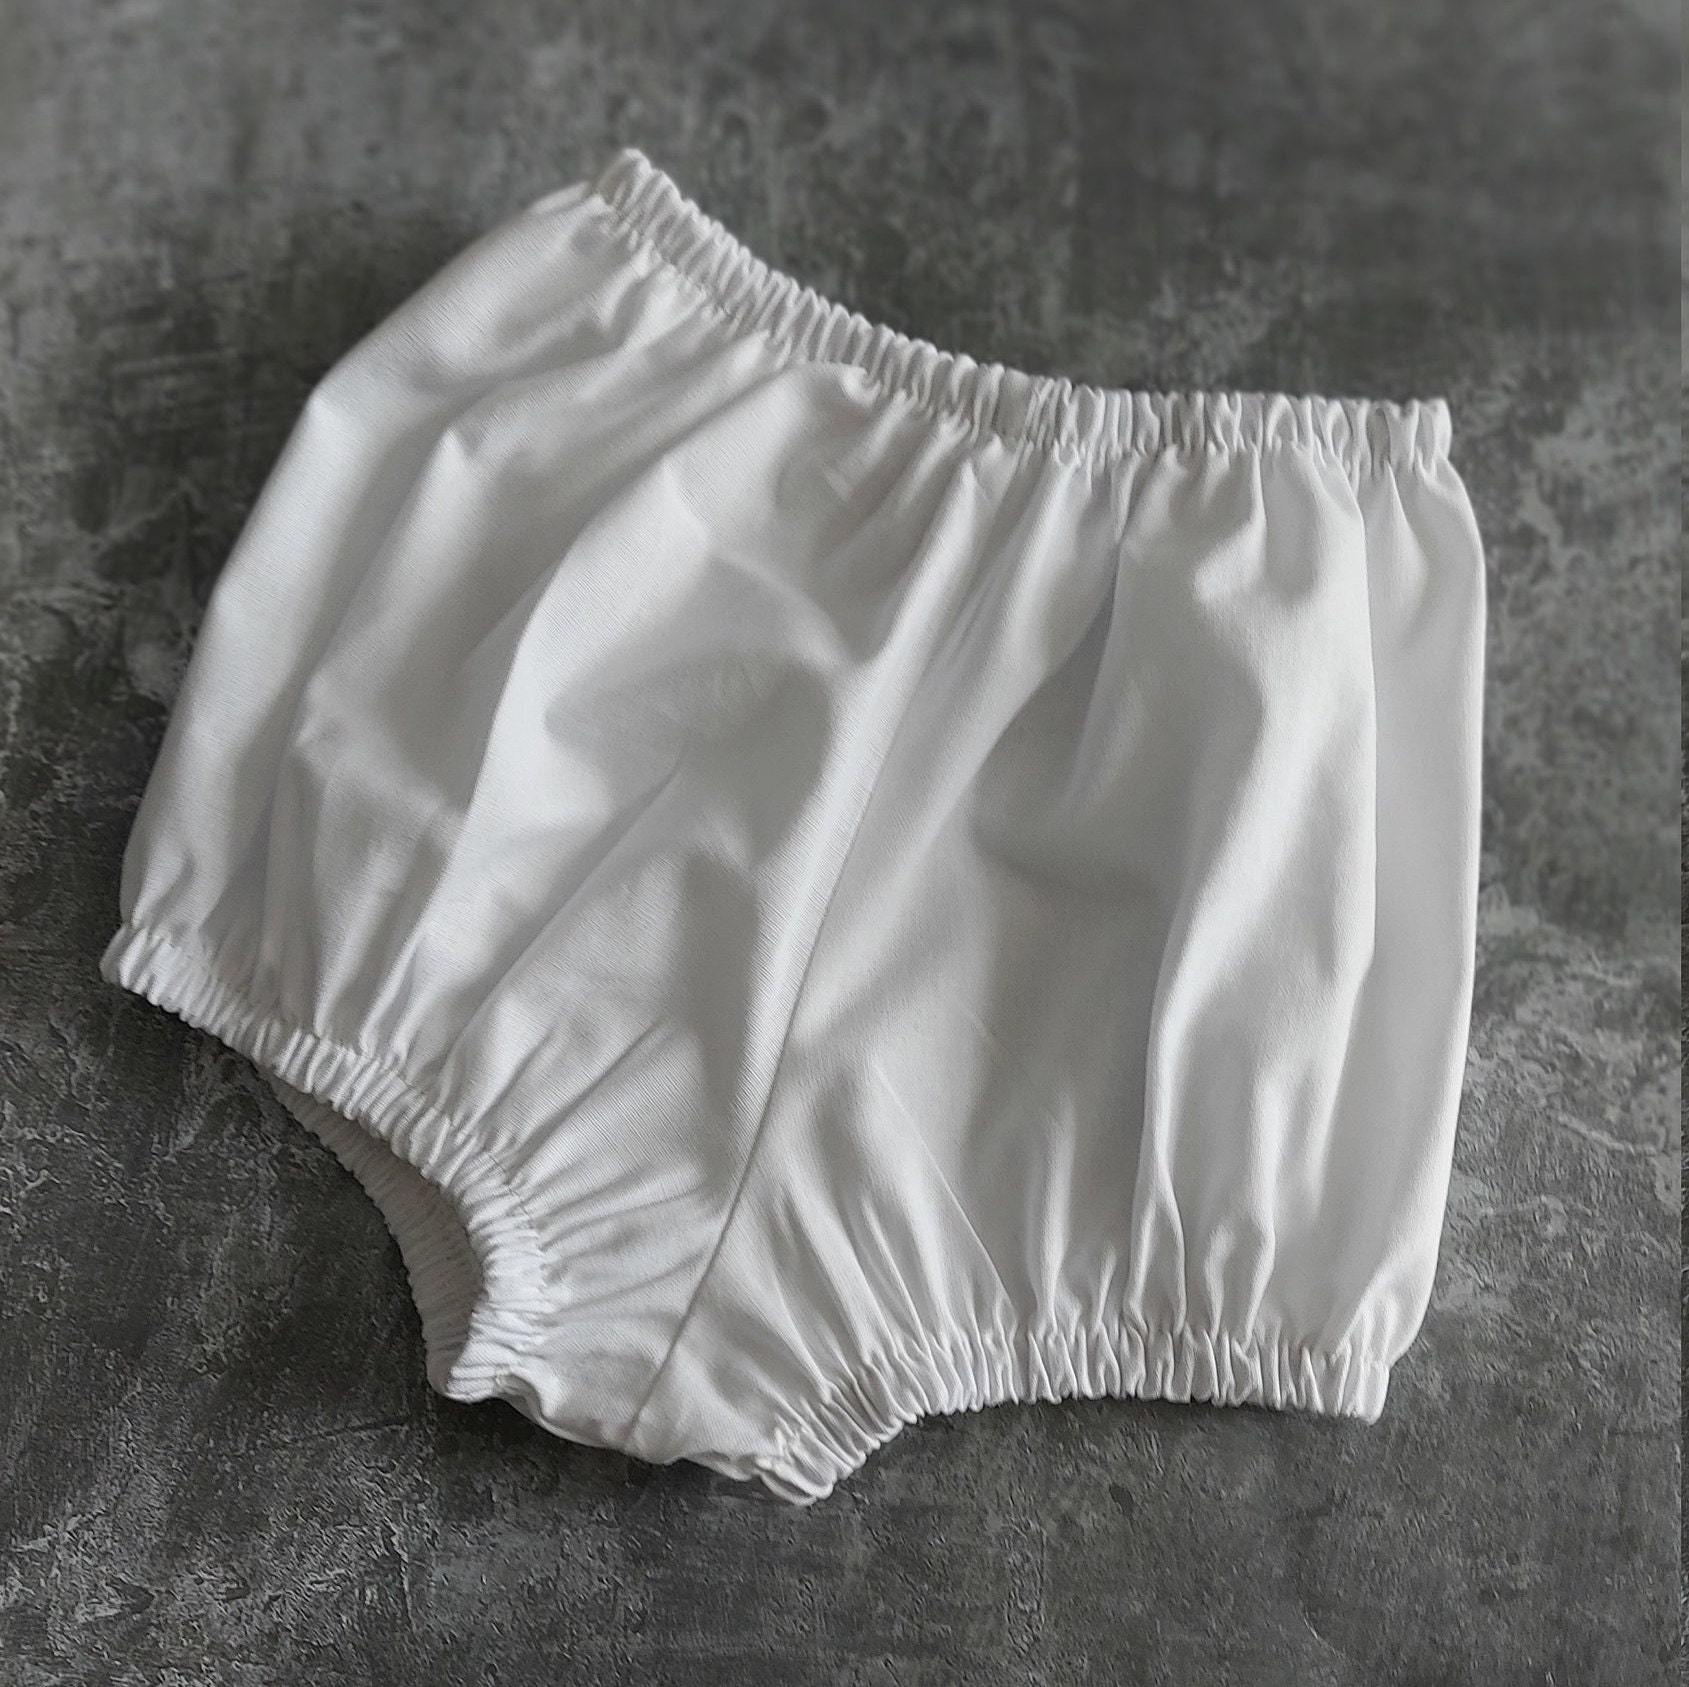 Bloomers Plastic Pants with Short Legs (PB263) €36.00